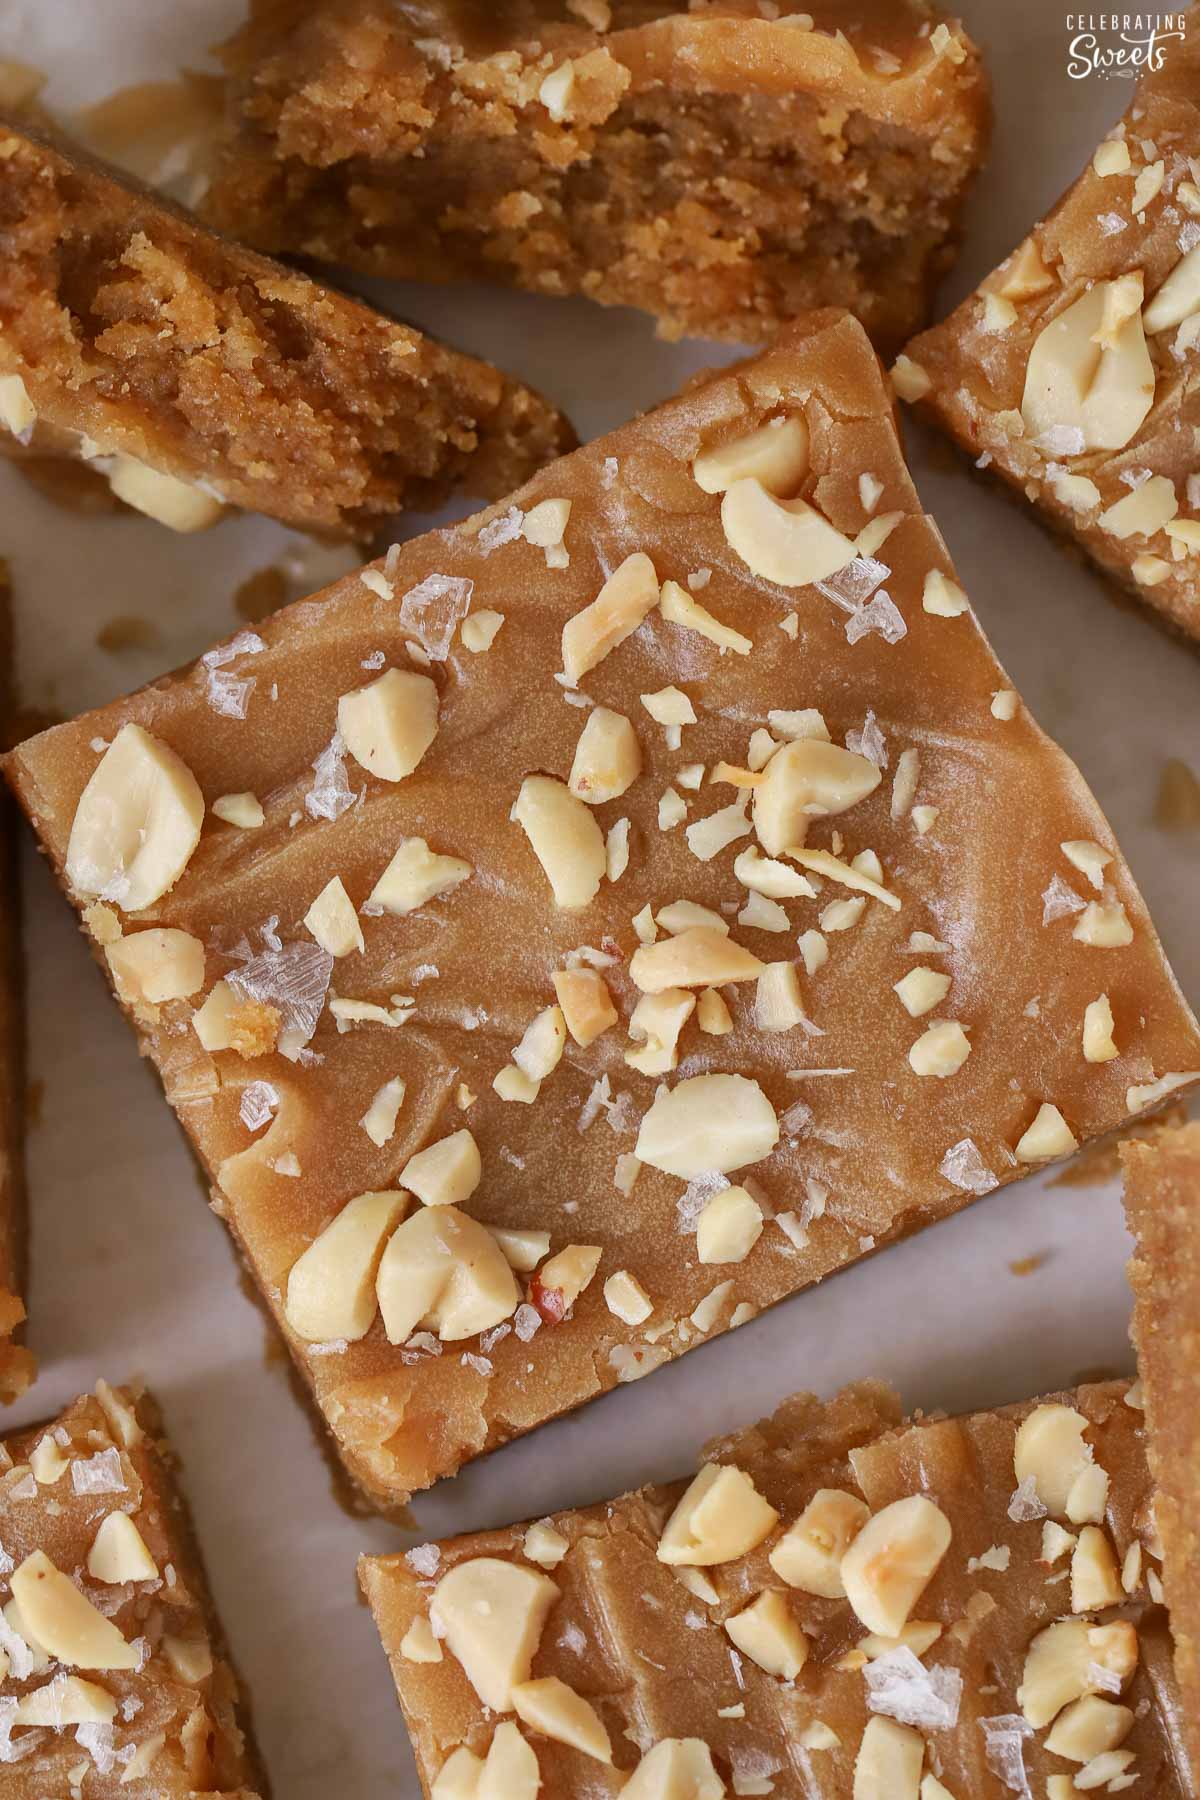 Peanut butter bar topped with peanut butter icing, peanuts, and sea salt.